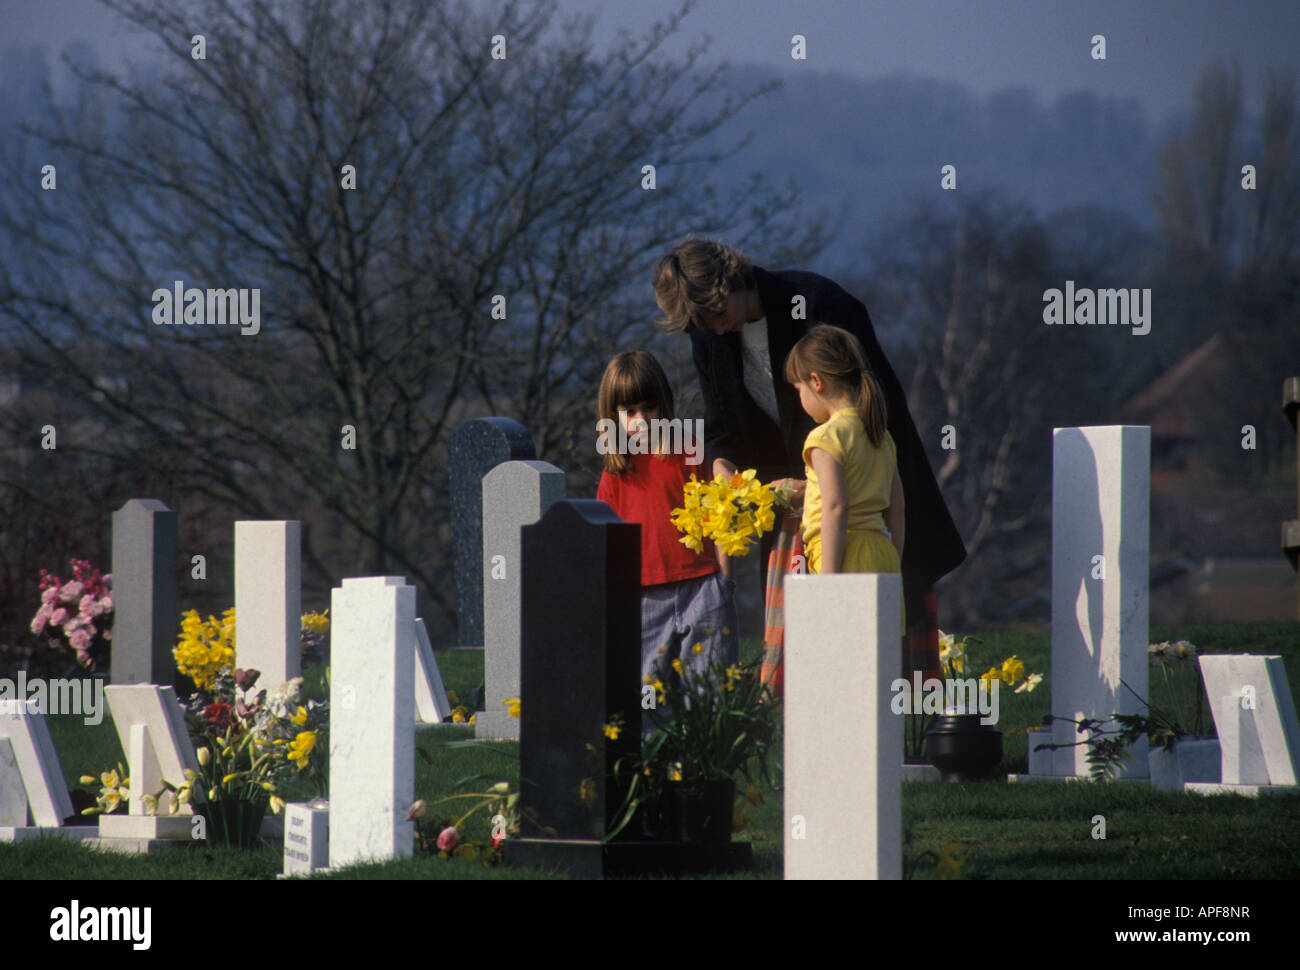 mother and children in a graveyard Stock Photo